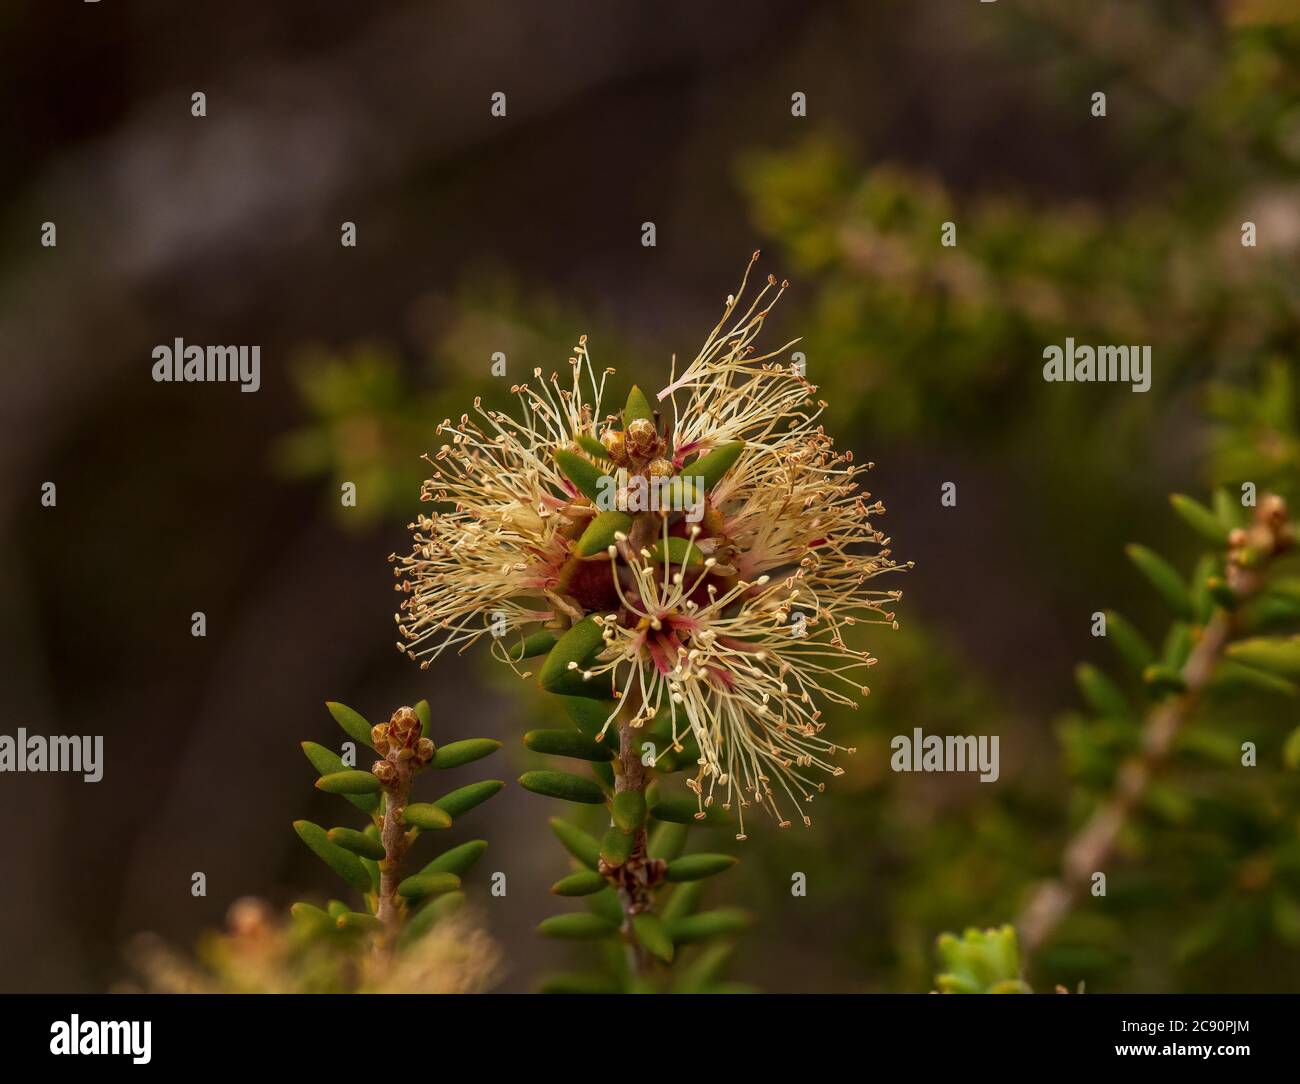 The flower of the Melaleuca tree commonly known as a Moonah (Melaleuca lanceolata) Stock Photo